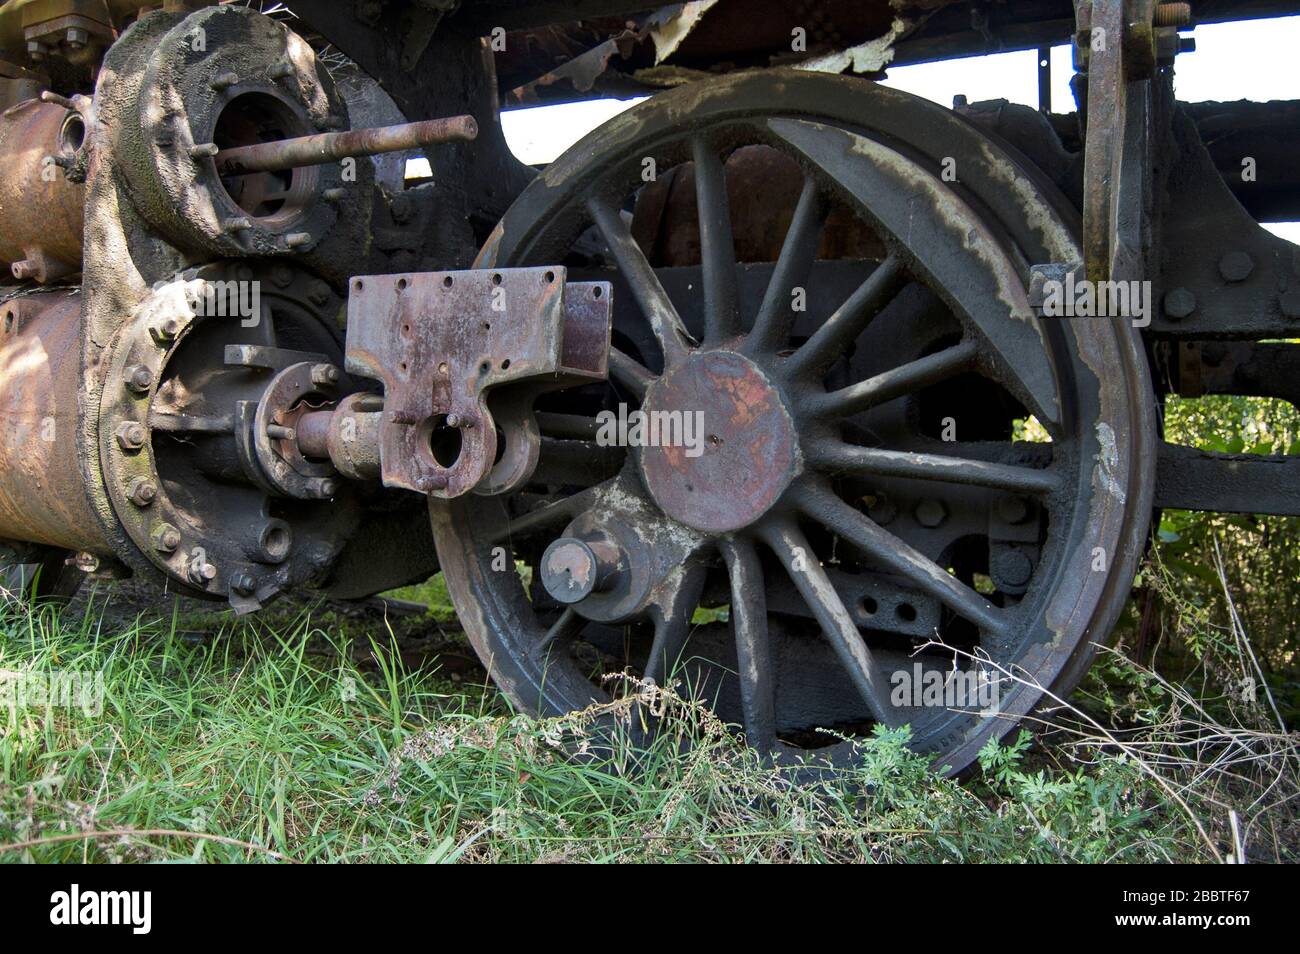 Old dysfunctional railway steam locomotive which is overgrown with weeds. Stock Photo